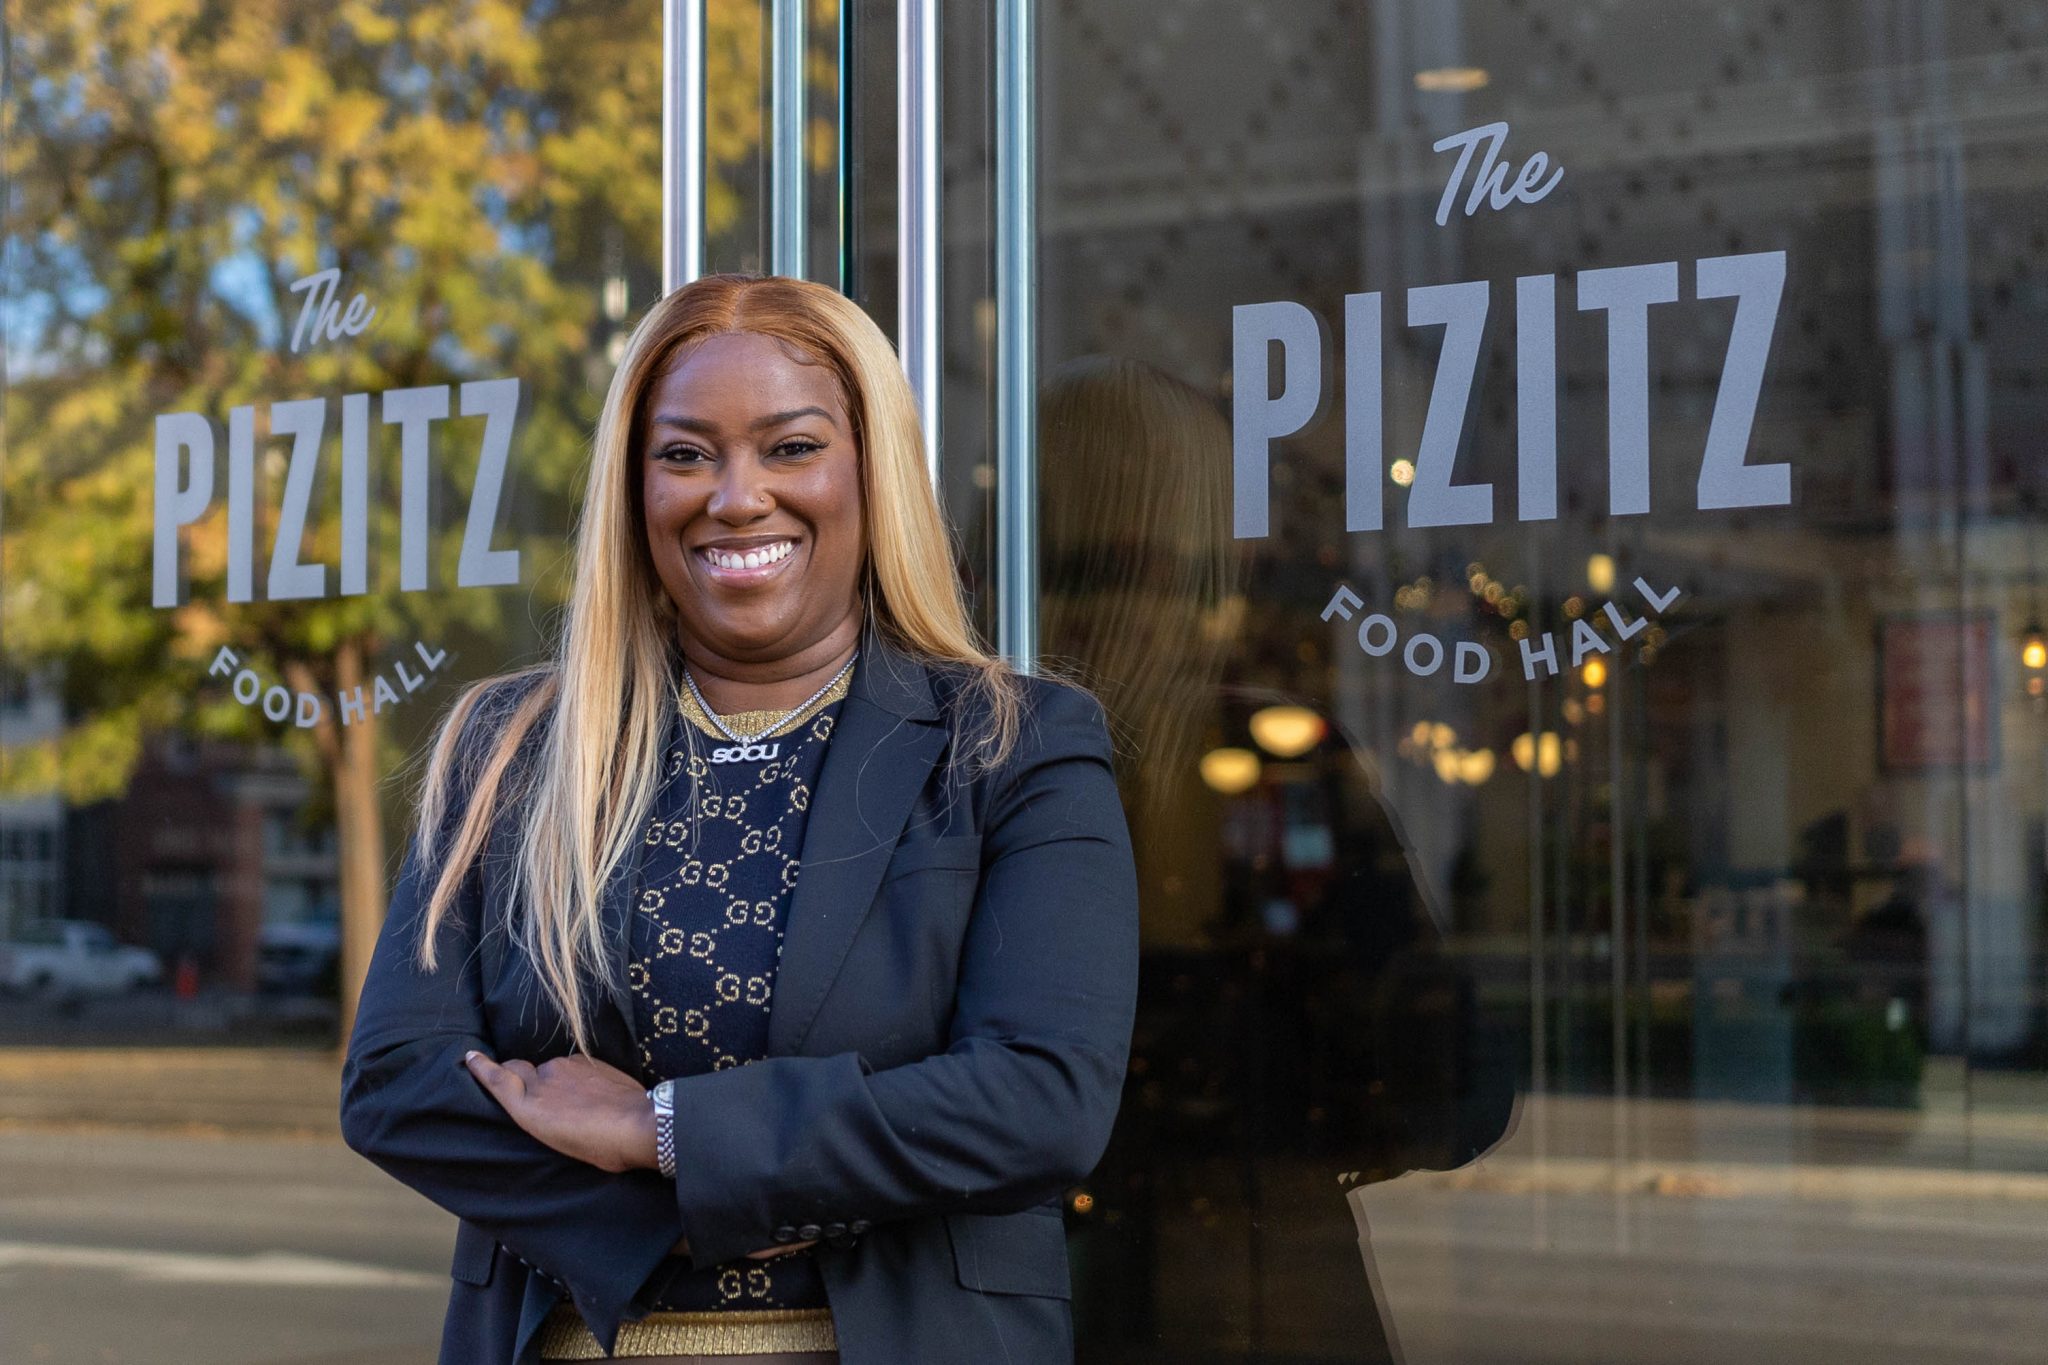 SOCU is coming to The Pizitz Food Hall—delicious details here